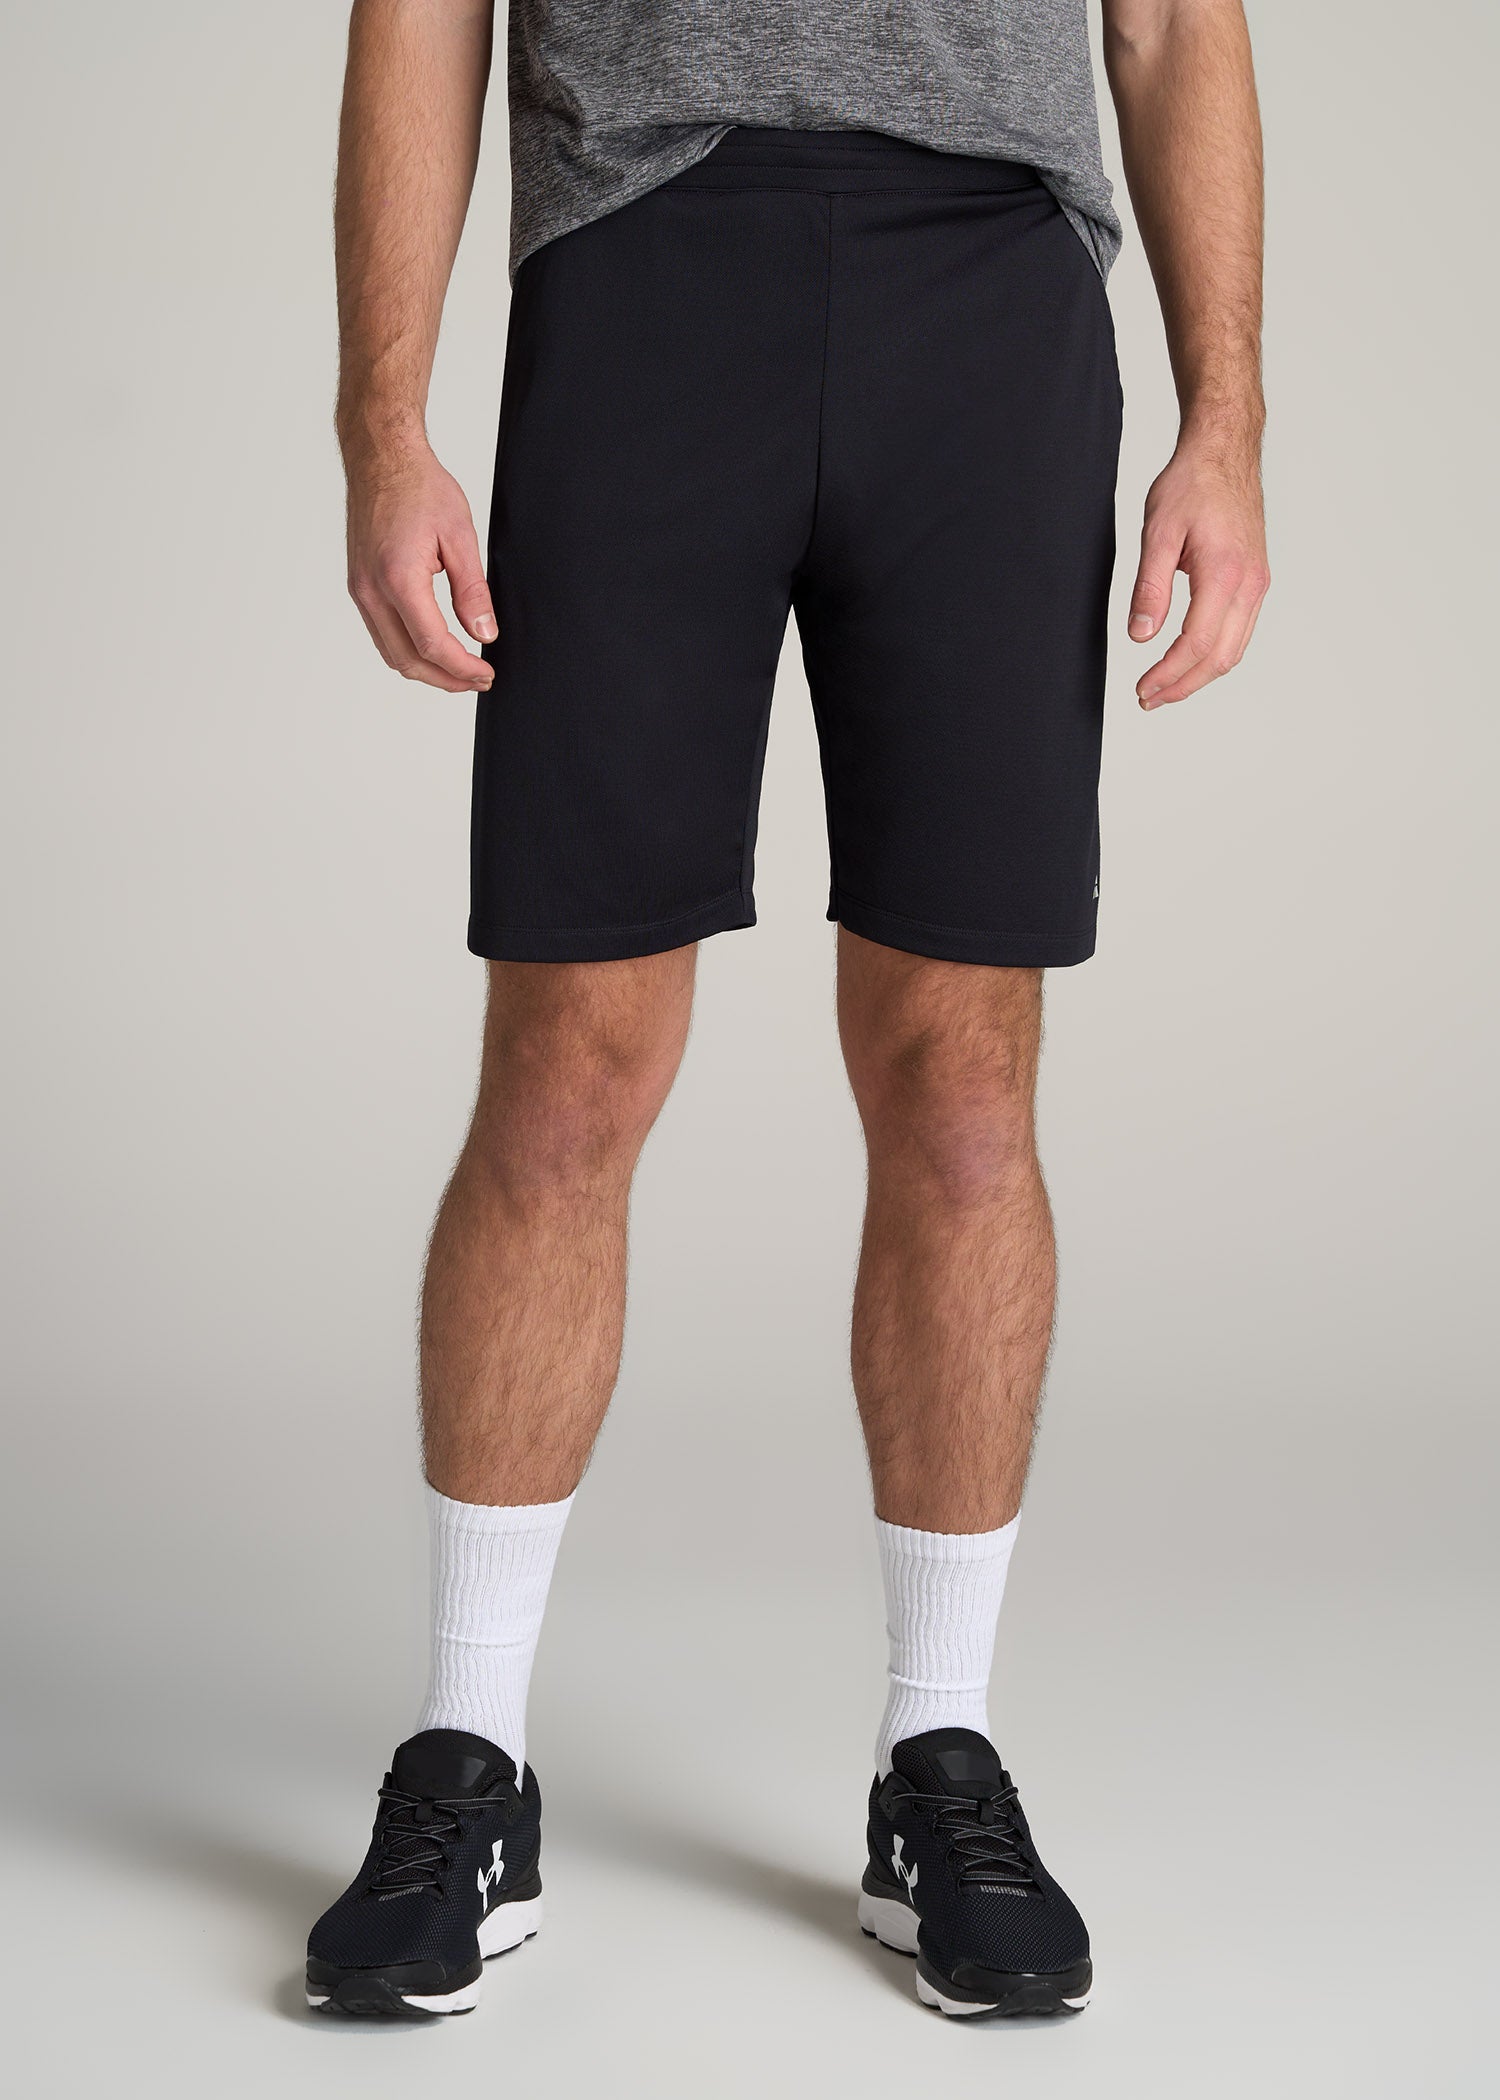     American-Tall-Men-Performance-Engineered-Athletic-Shorts-Black-front